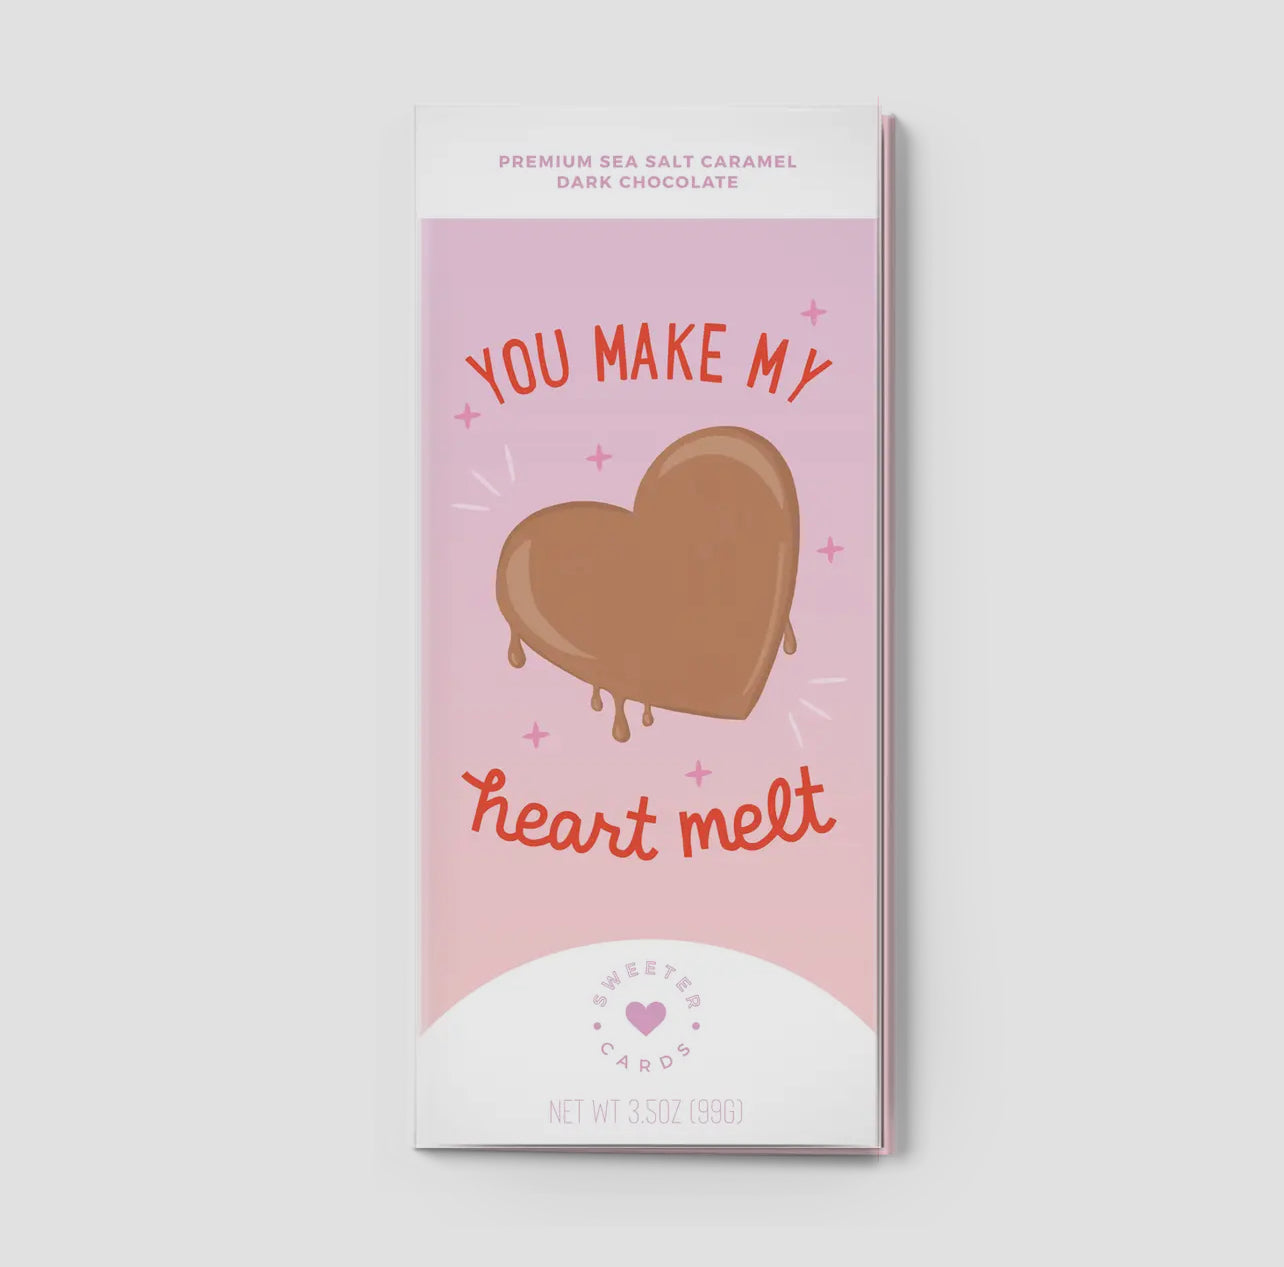 YOU MAKE MY HEART MELT - Valentine's Day Card with Chocolate Bar